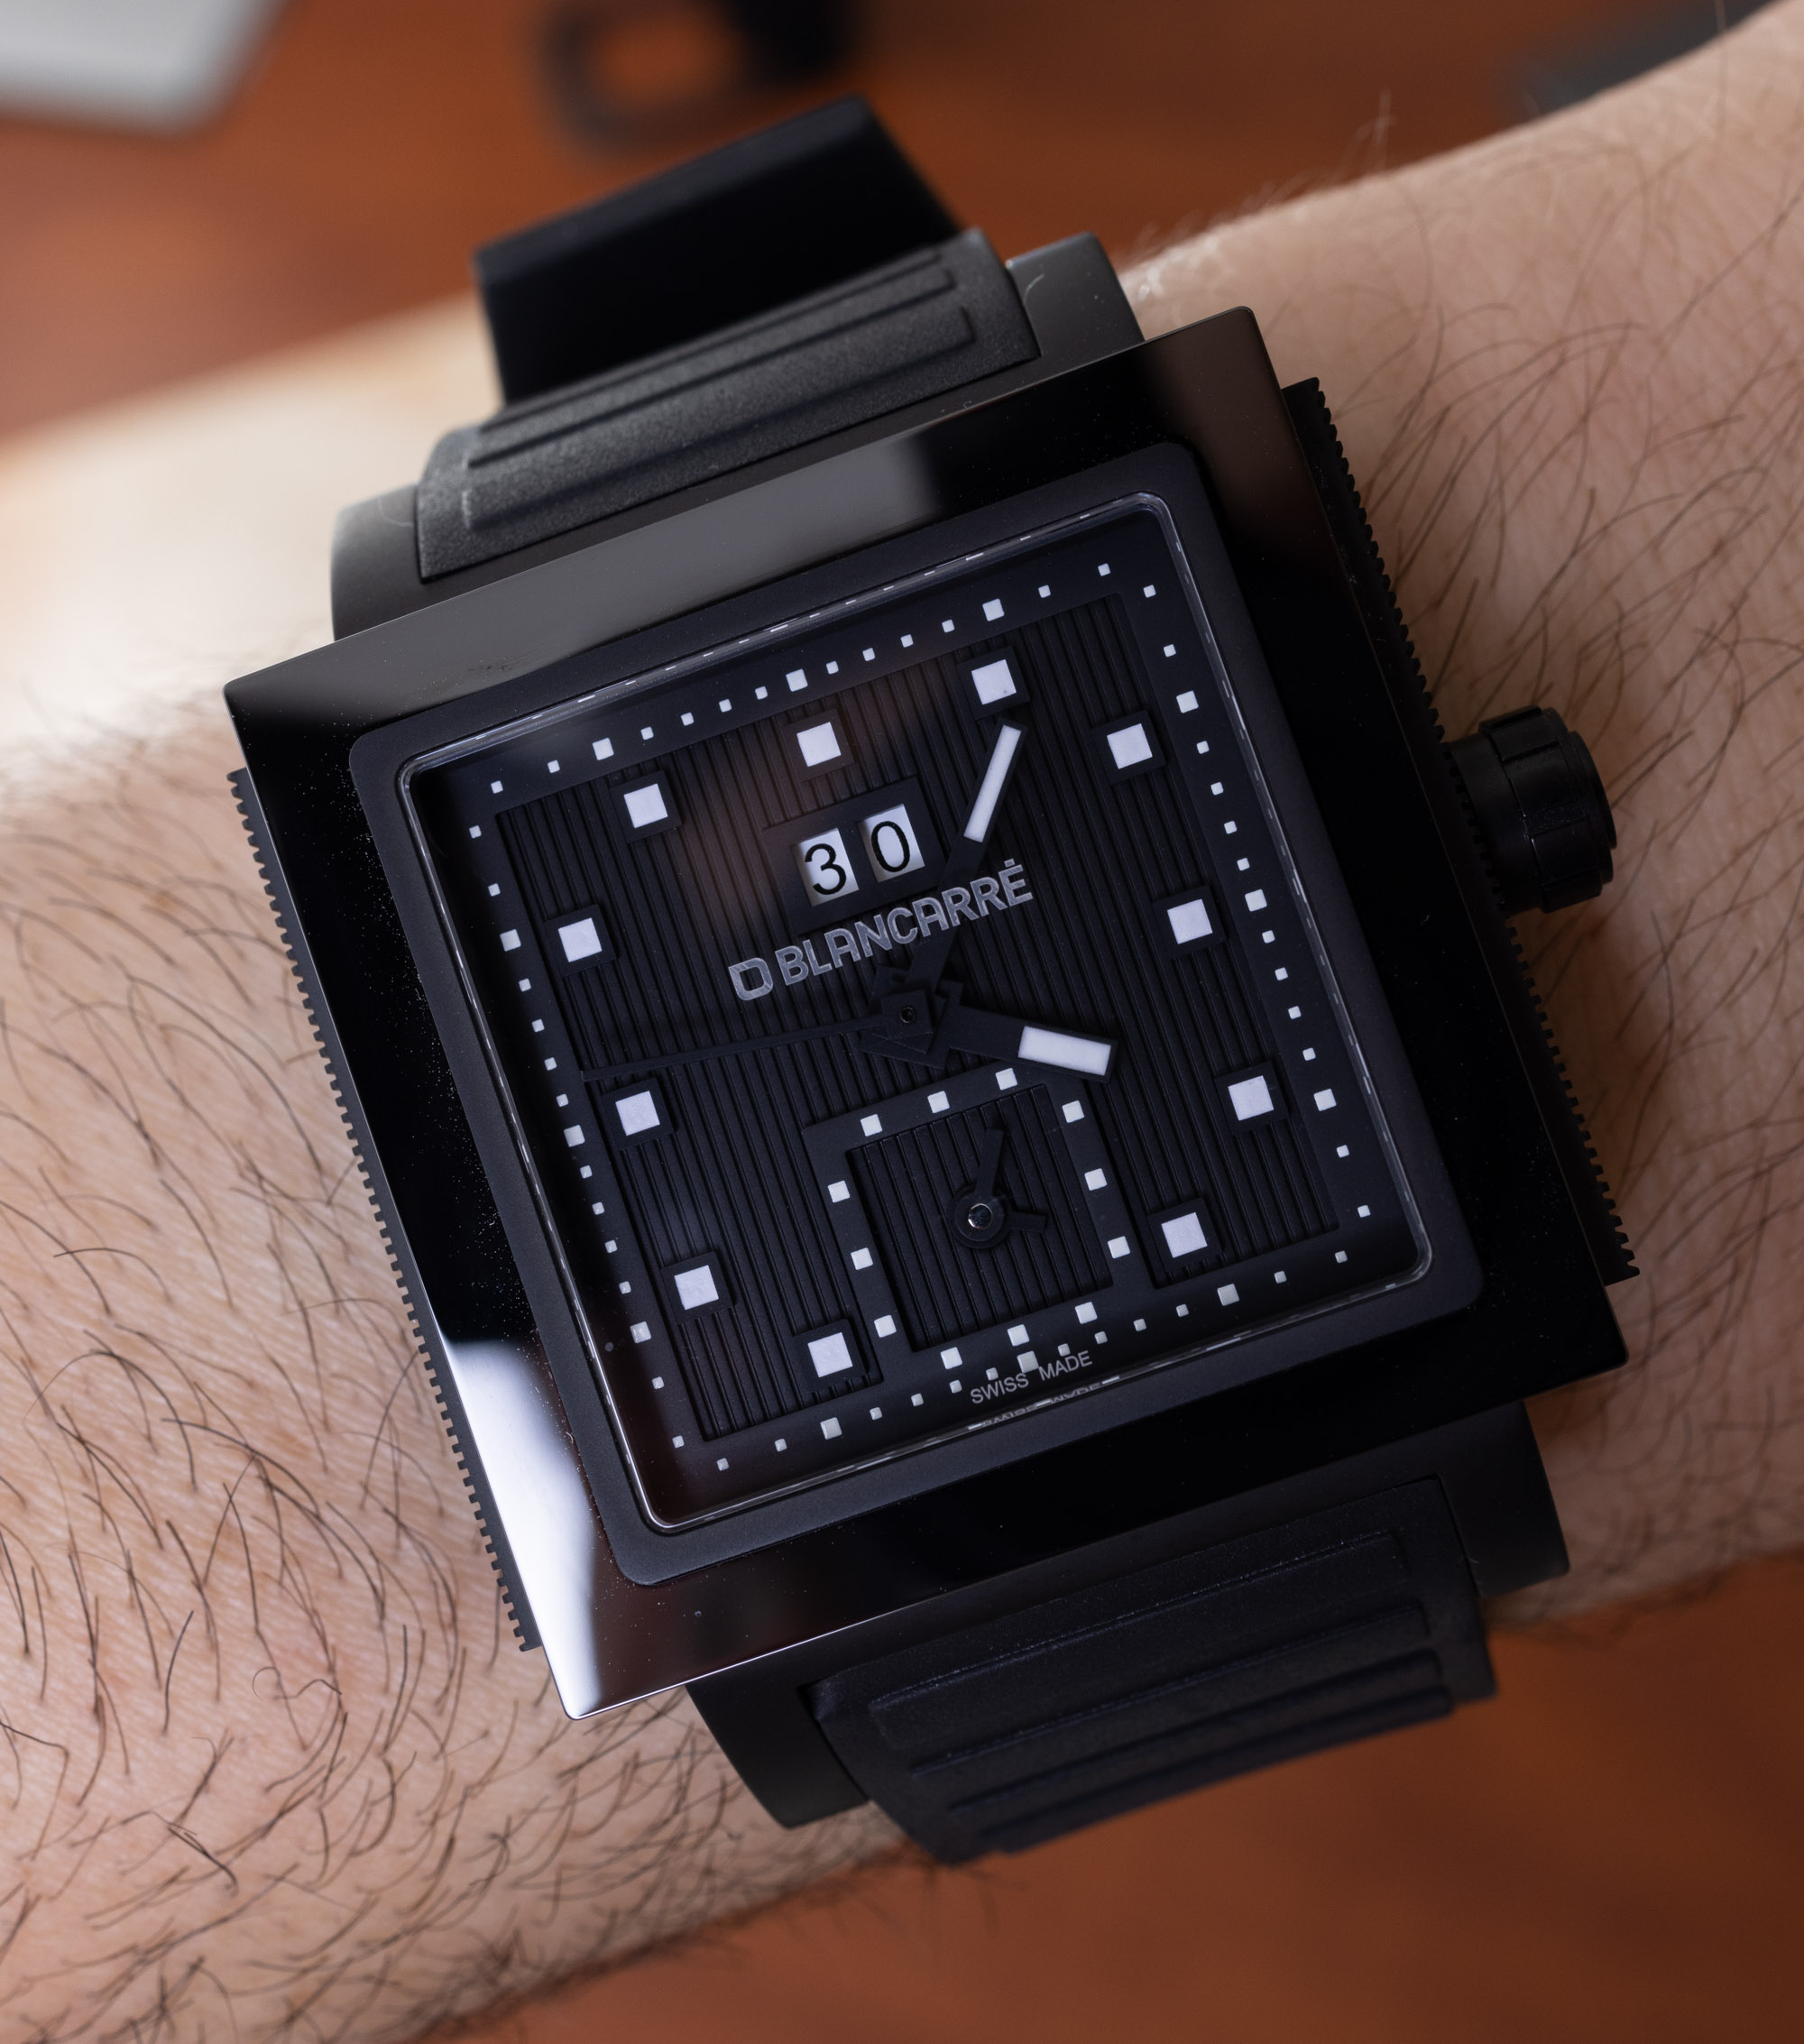 https://www.ablogtowatch.com/wp-content/uploads/2023/06/Blancarre-Solid-Black-Square-Watch-7.jpg